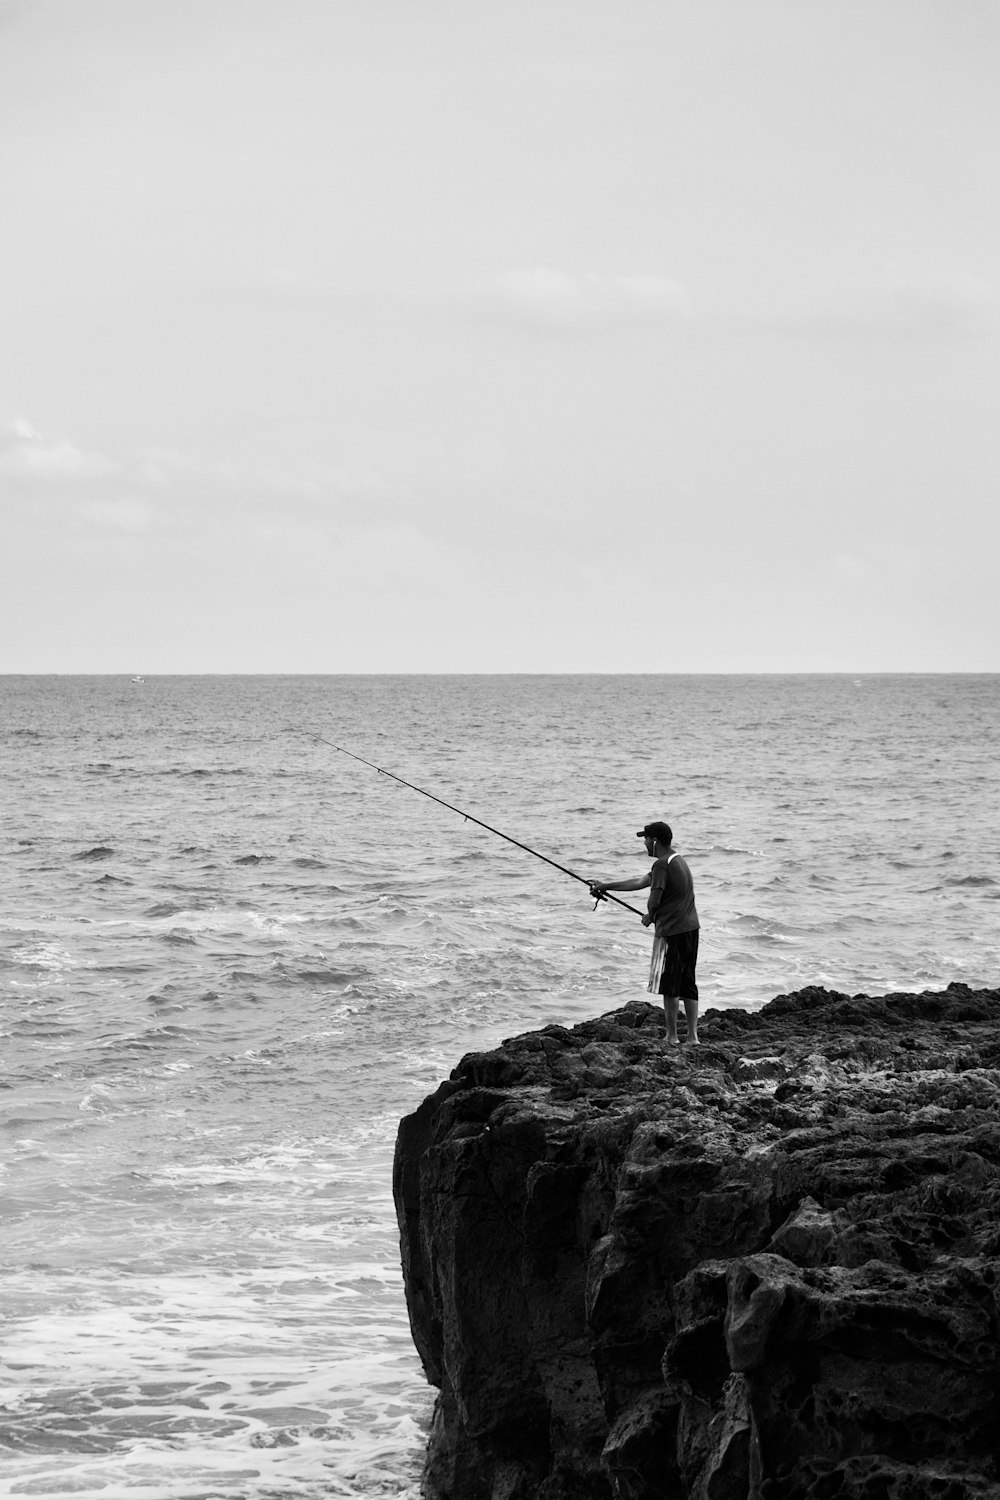 man in black shirt and pants fishing on sea